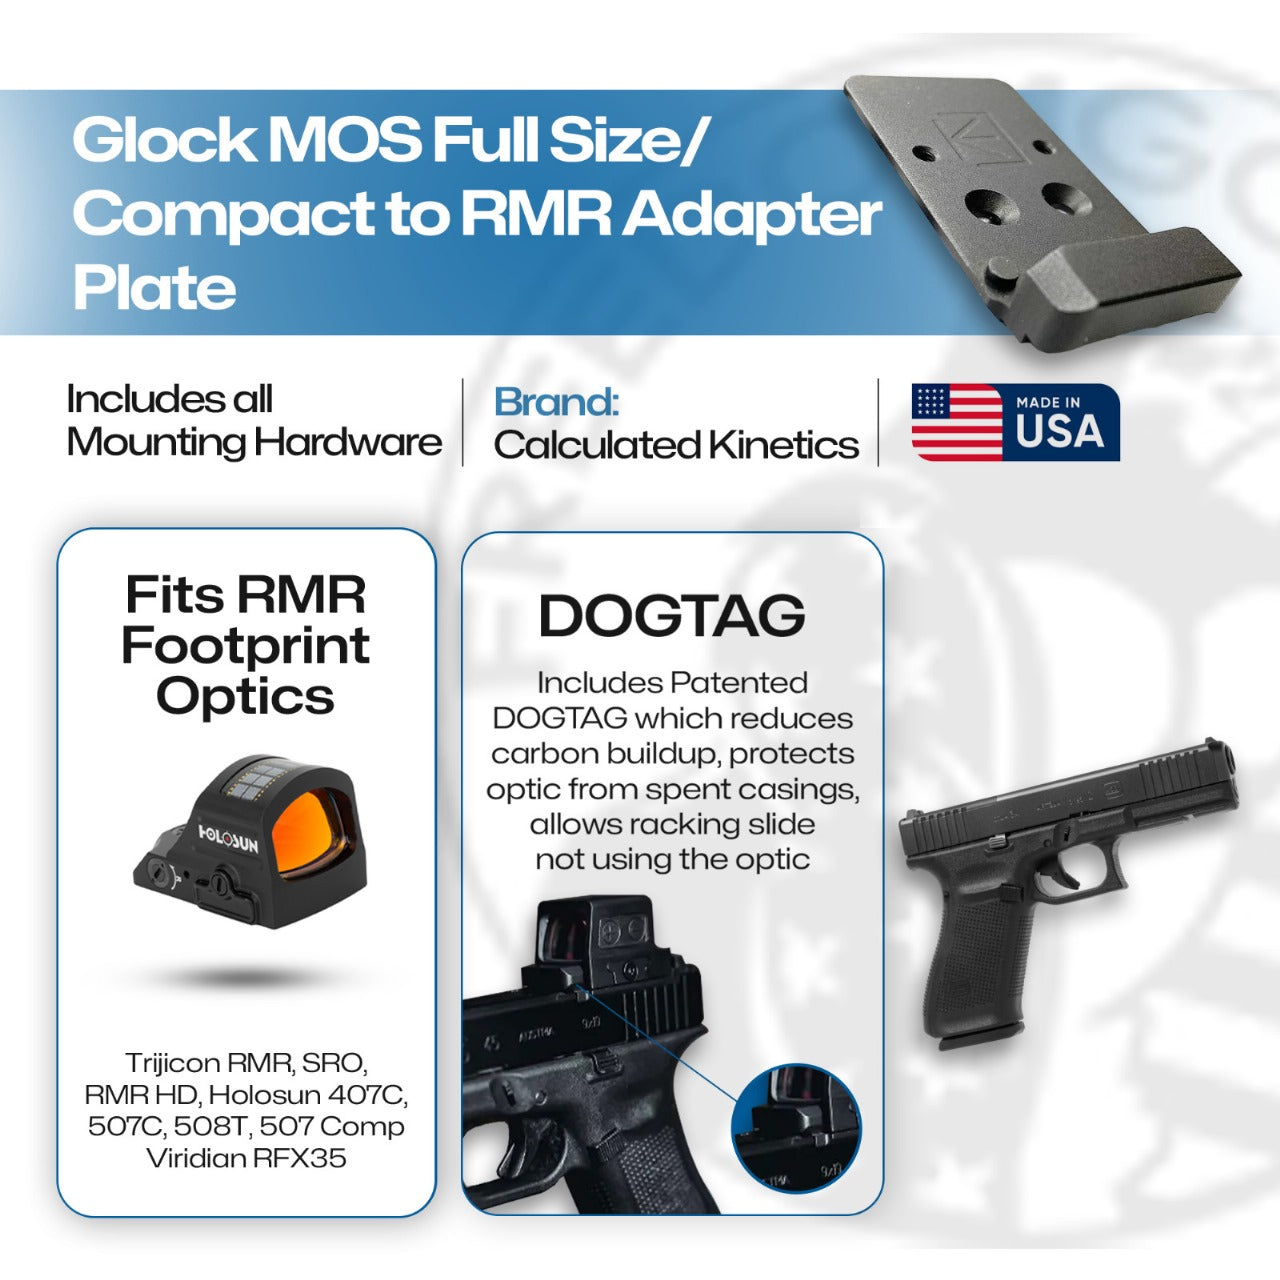 Glock MOS Full Size/Compact to RMR Adapter Plate - DOGTAG - Aluminum - Calculated Kinetics - (Does not fit 10MM)